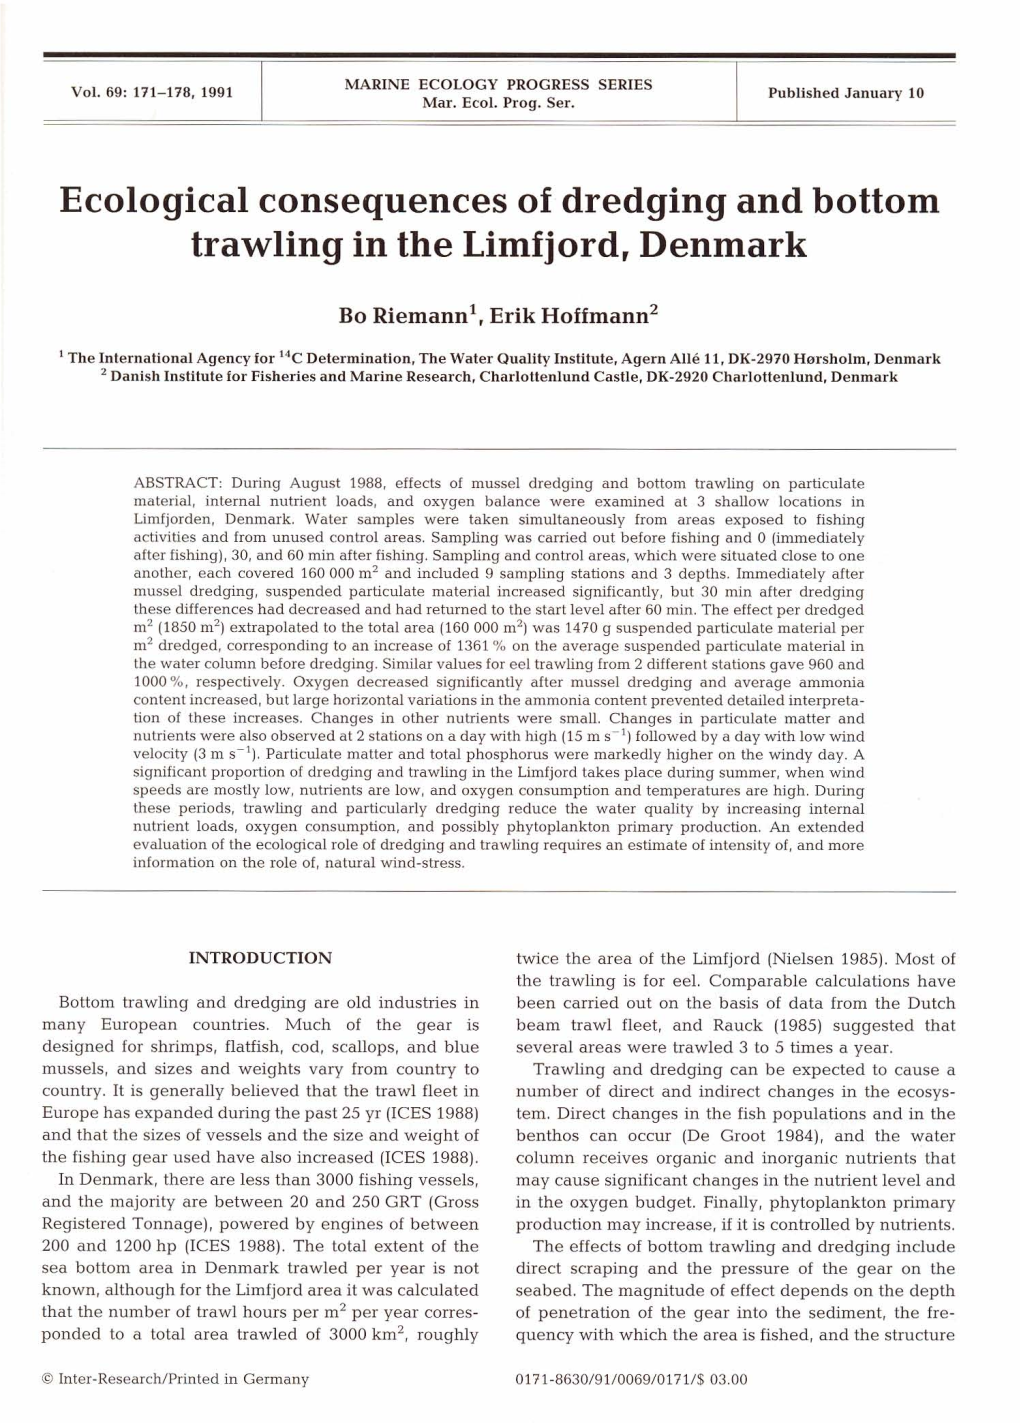 Ecological Consequences of Dredging and Bottom Trawling in the Limfjord, Denmark